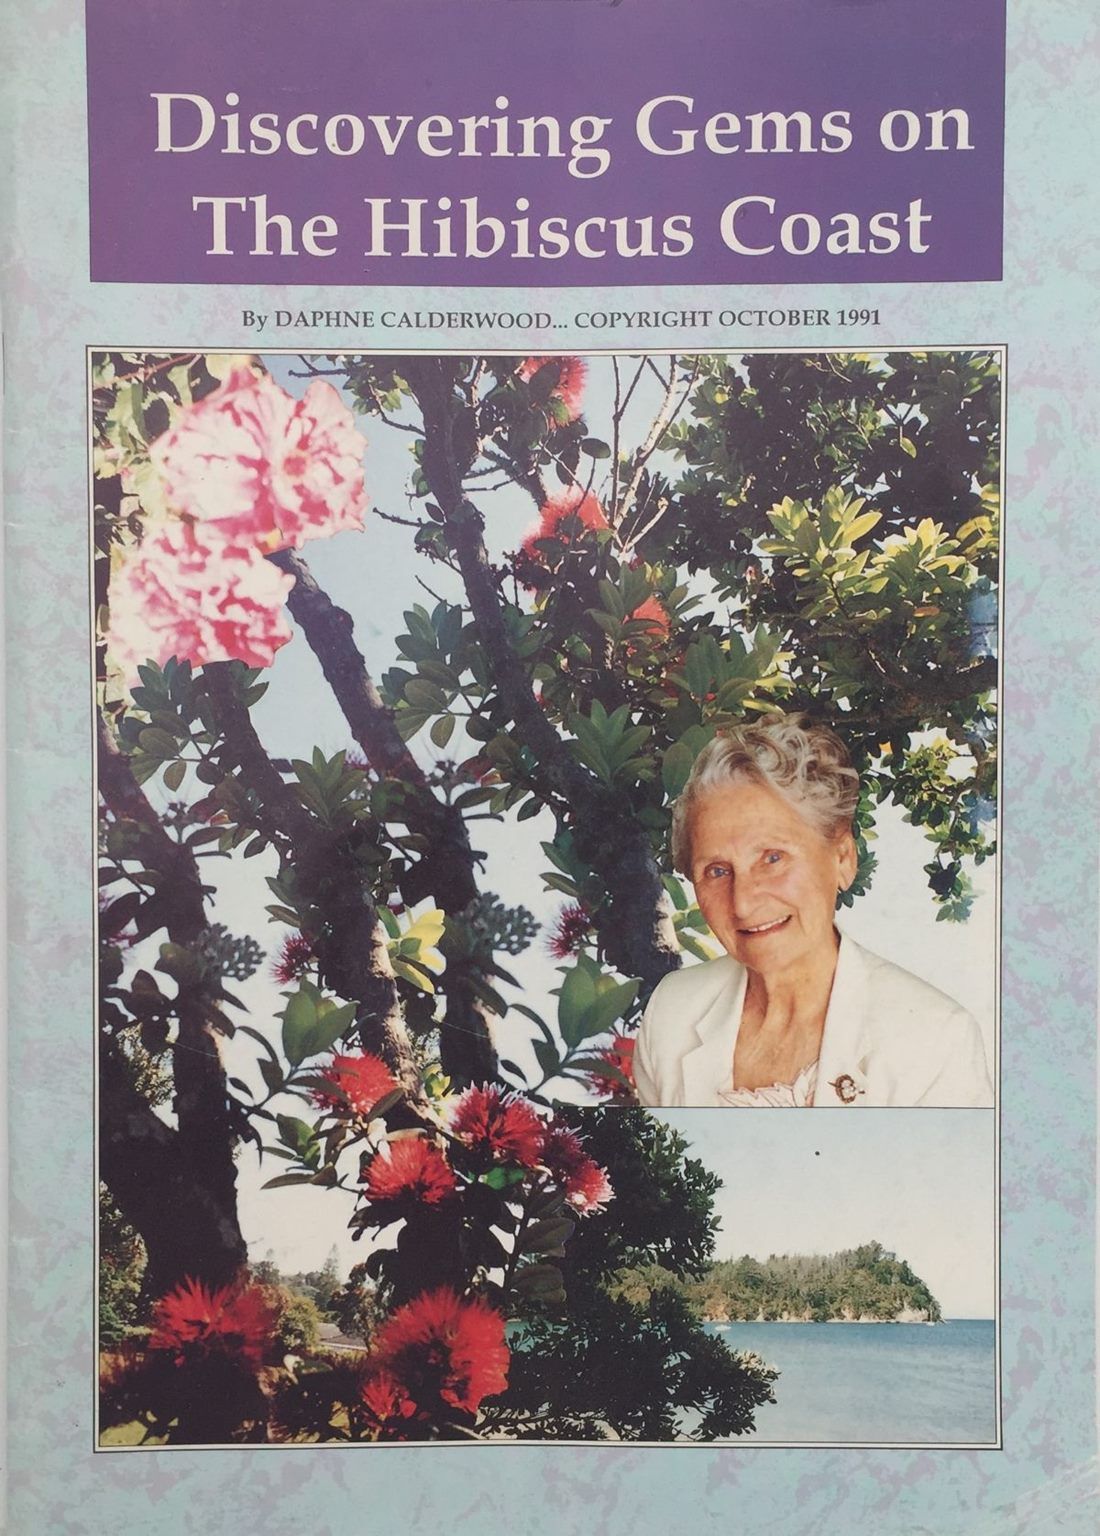 Discovering Gems on the Hibiscus Coast